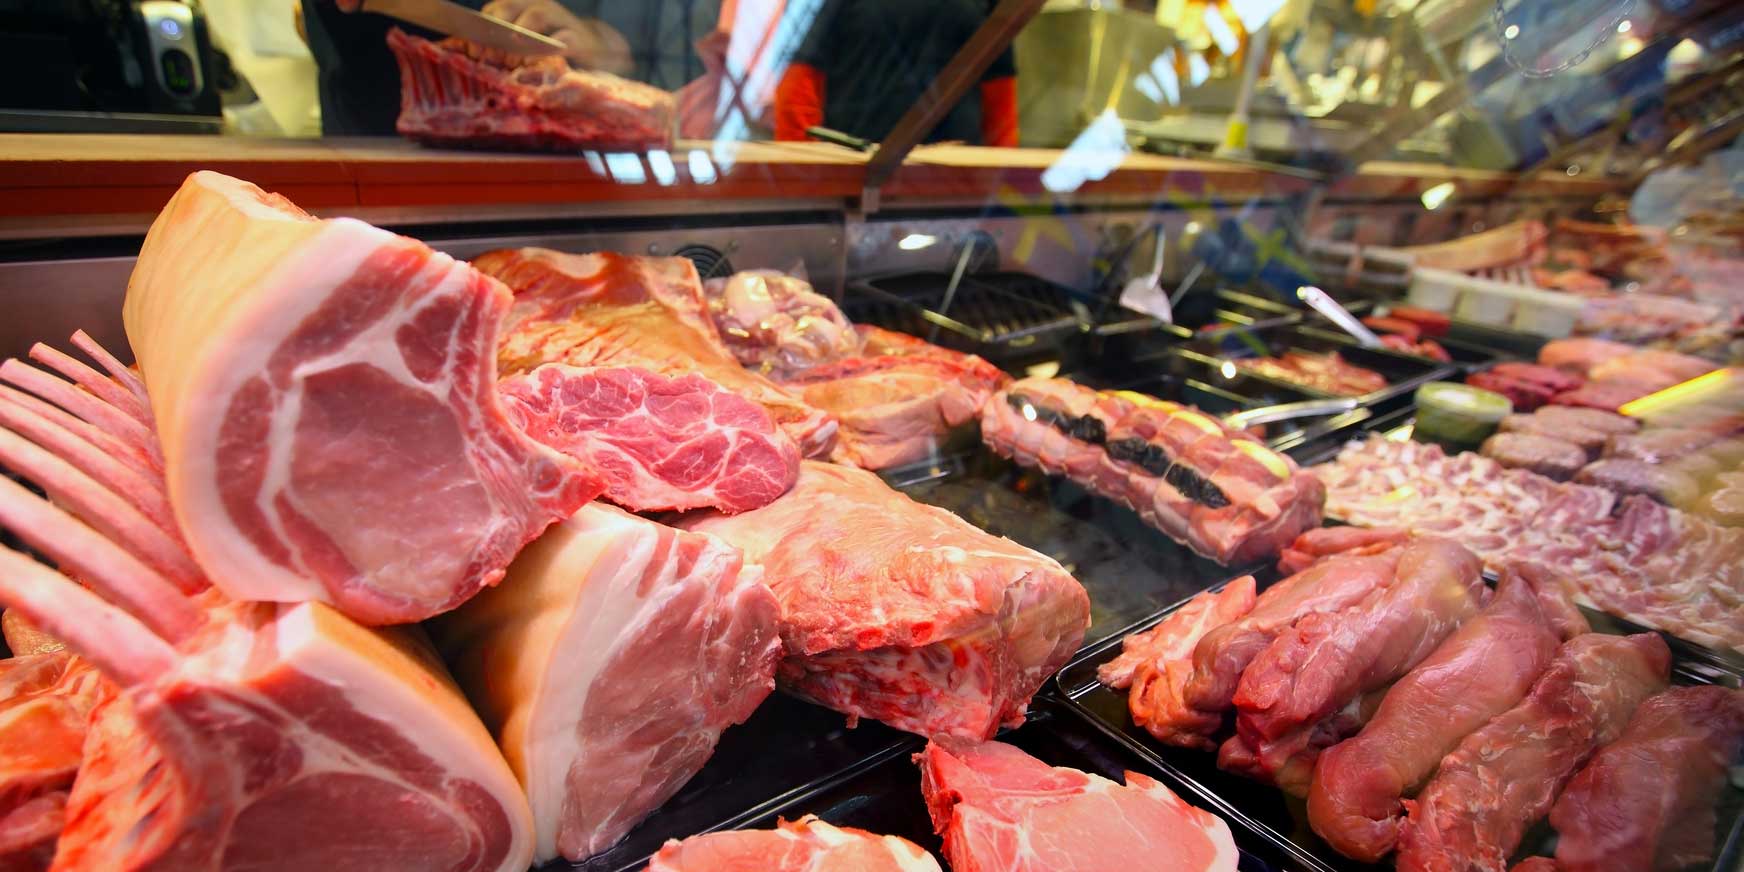 Your Family’s Meat—Will You Know Where It Comes From?